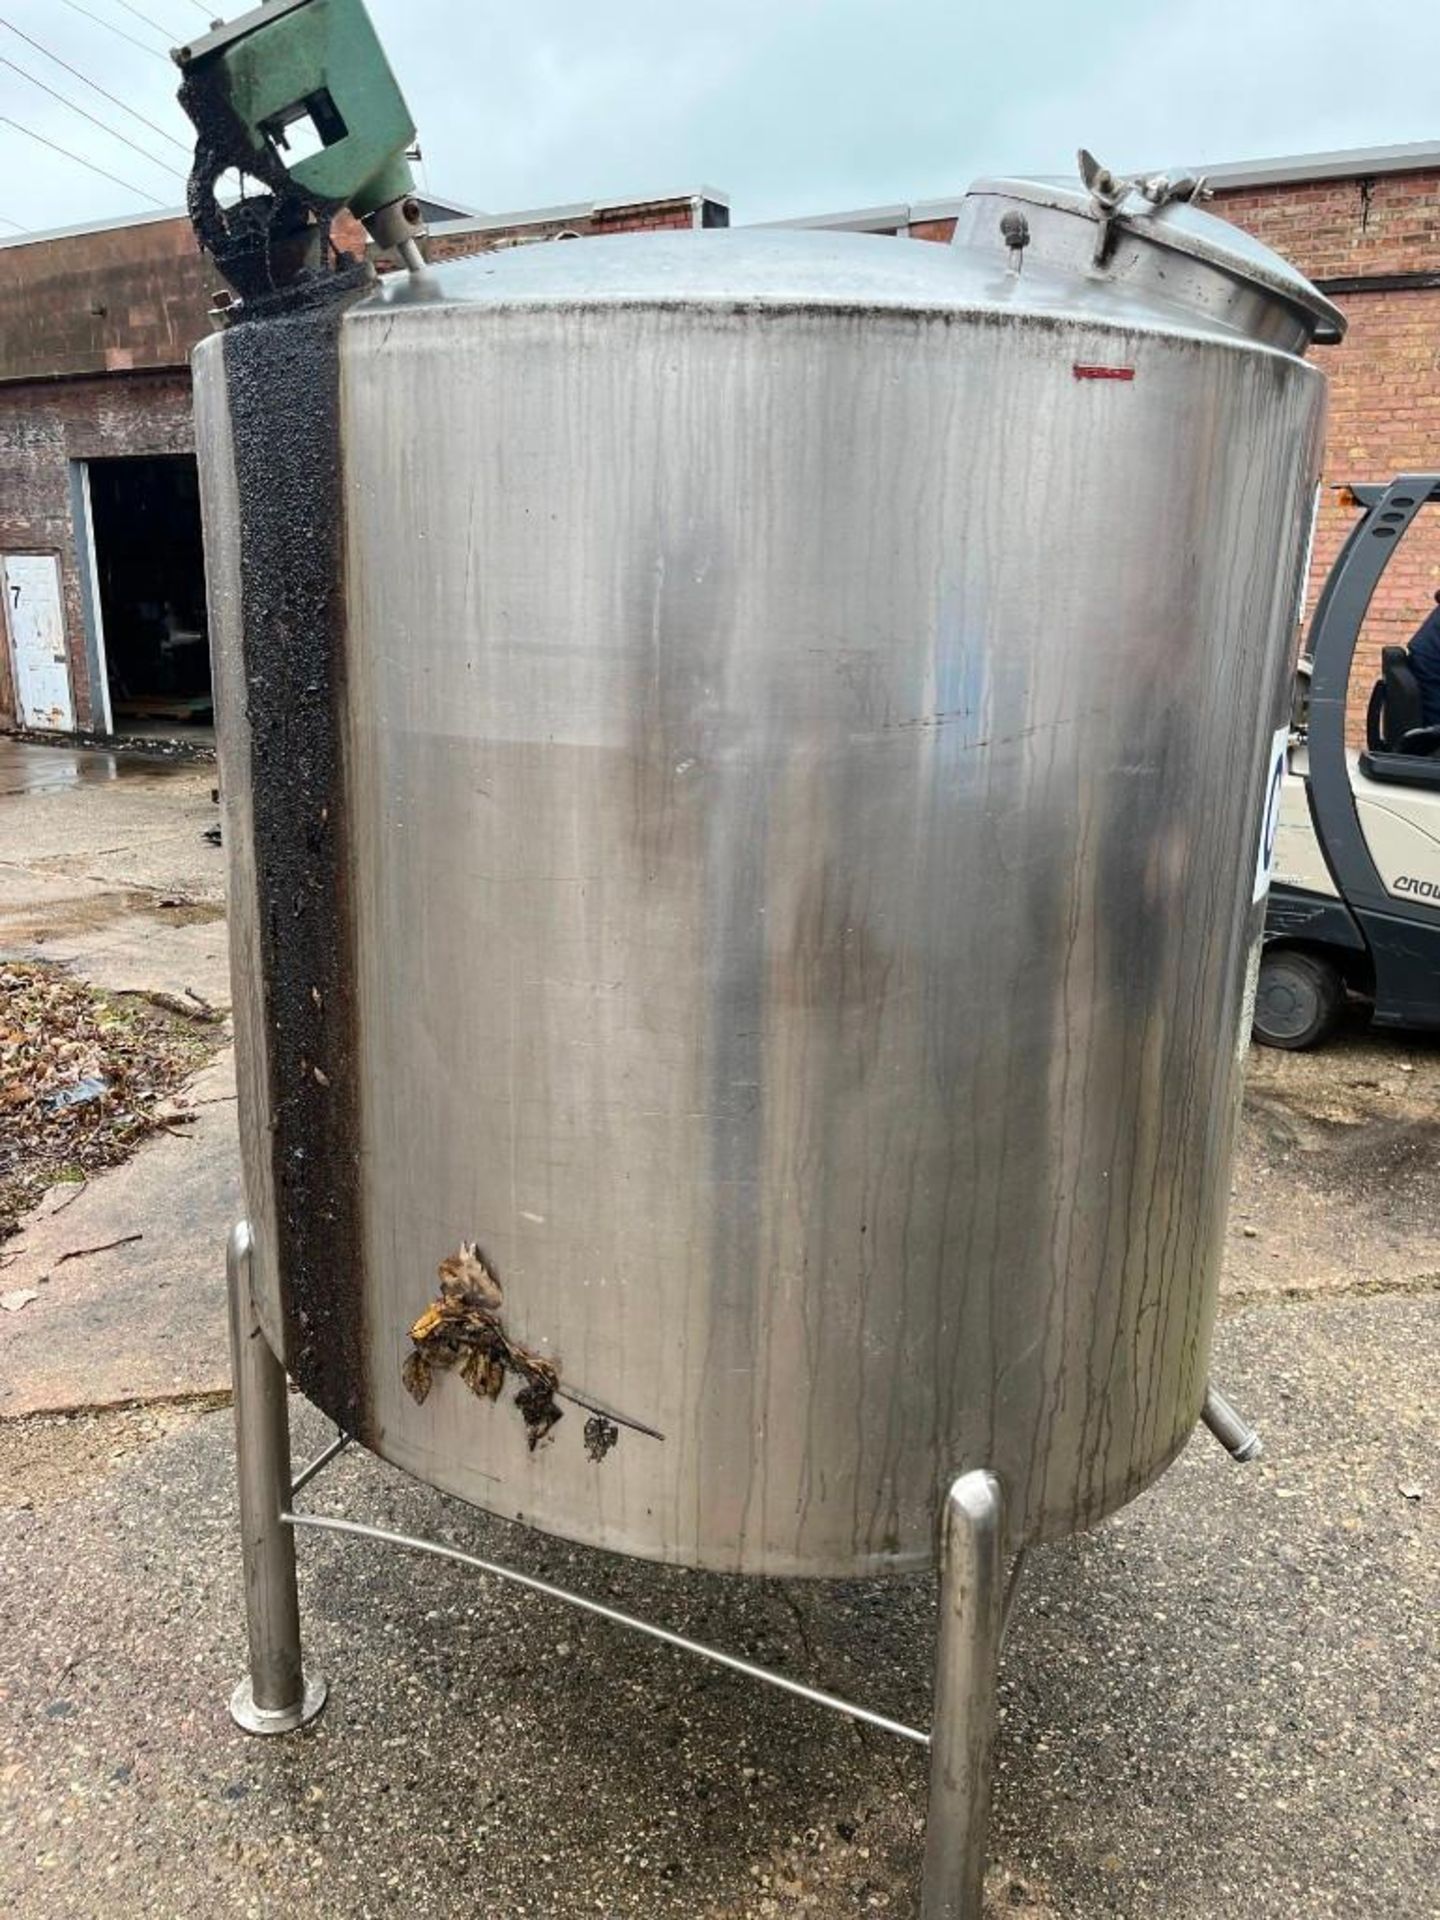 Cream City Boiler Co. Stainless Steel Single Wall Tank, Model F46, S/N: 4226. Has 24" top manhole co - Image 2 of 9